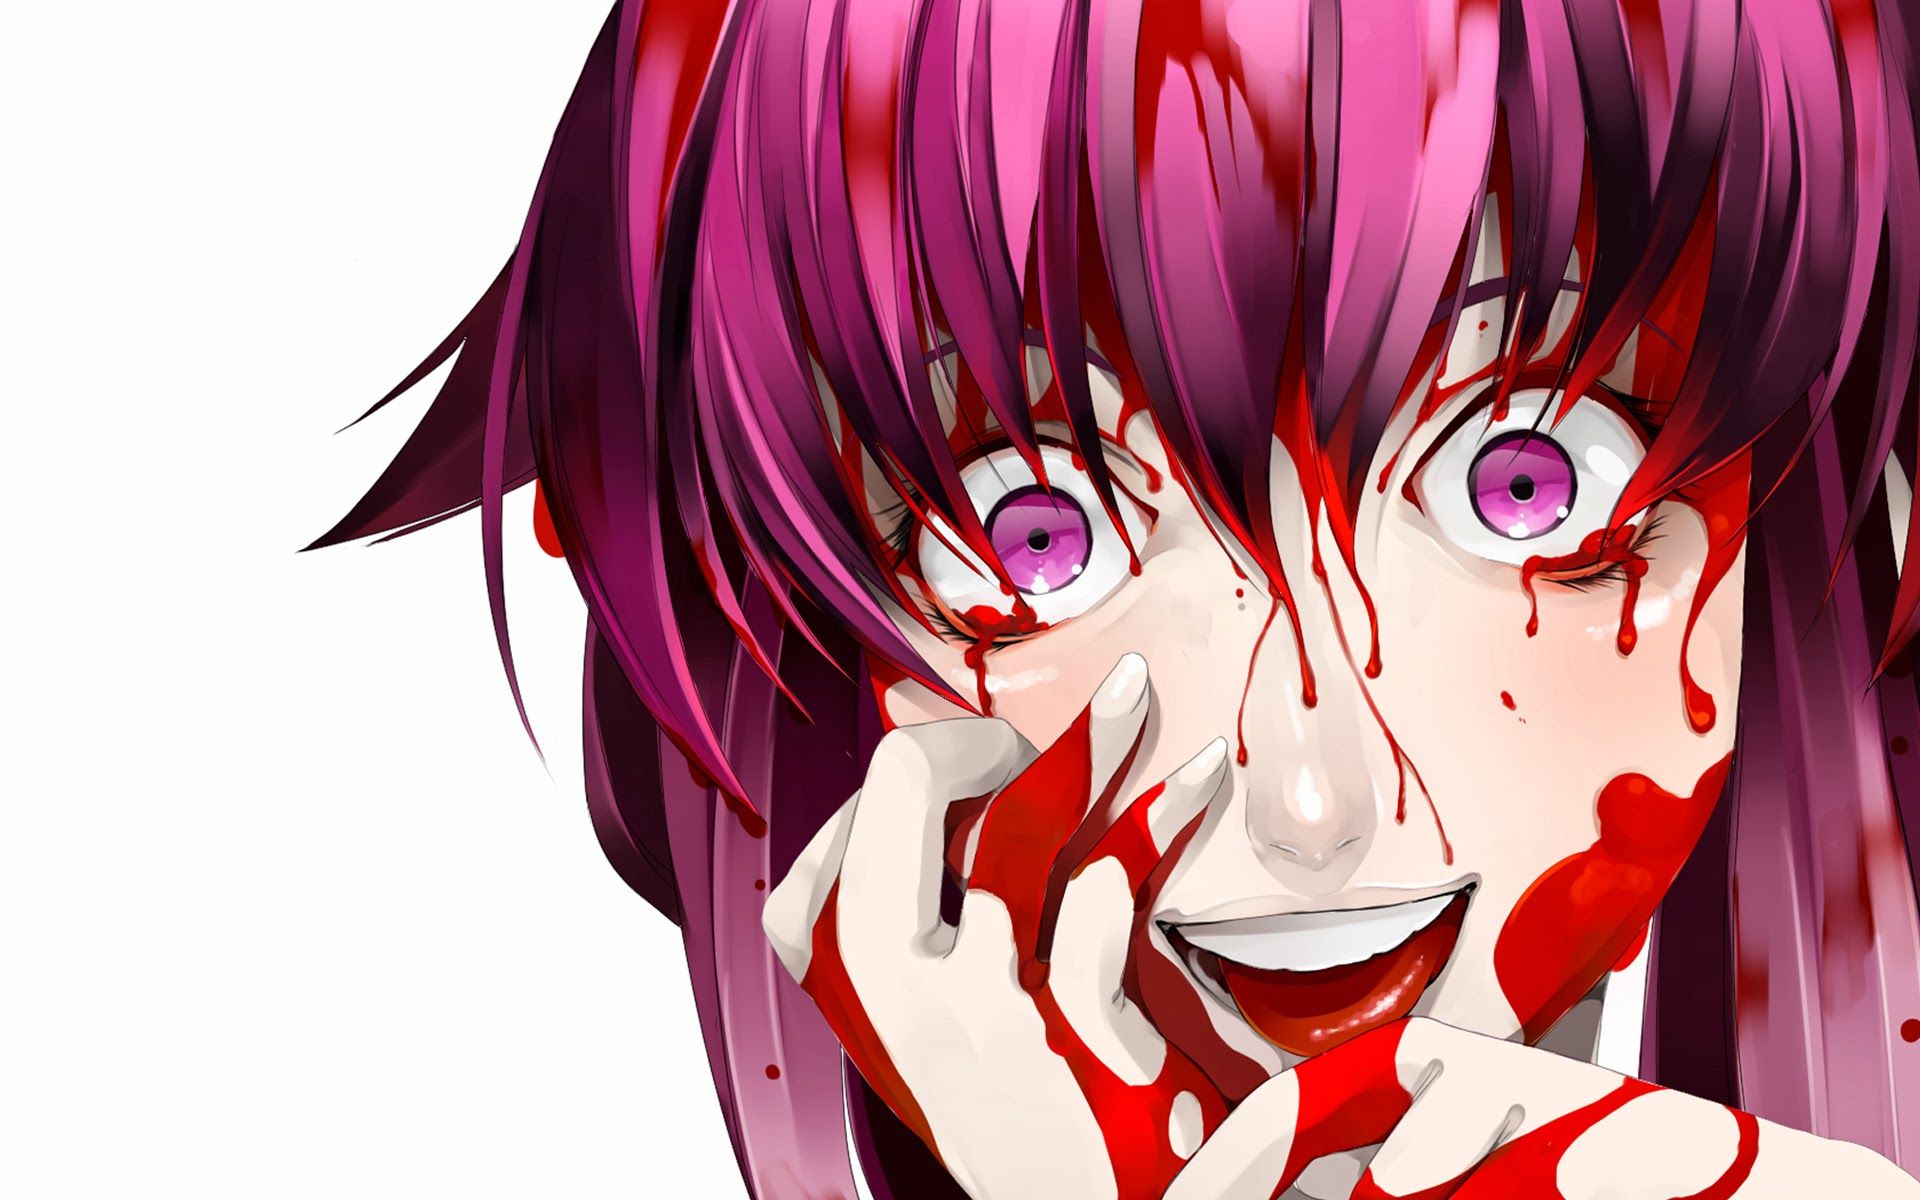 future diary blood smiling girl HD wallpaper anime 1920×1080 a943 1563 - Bloody Anime Girl Wallpaper